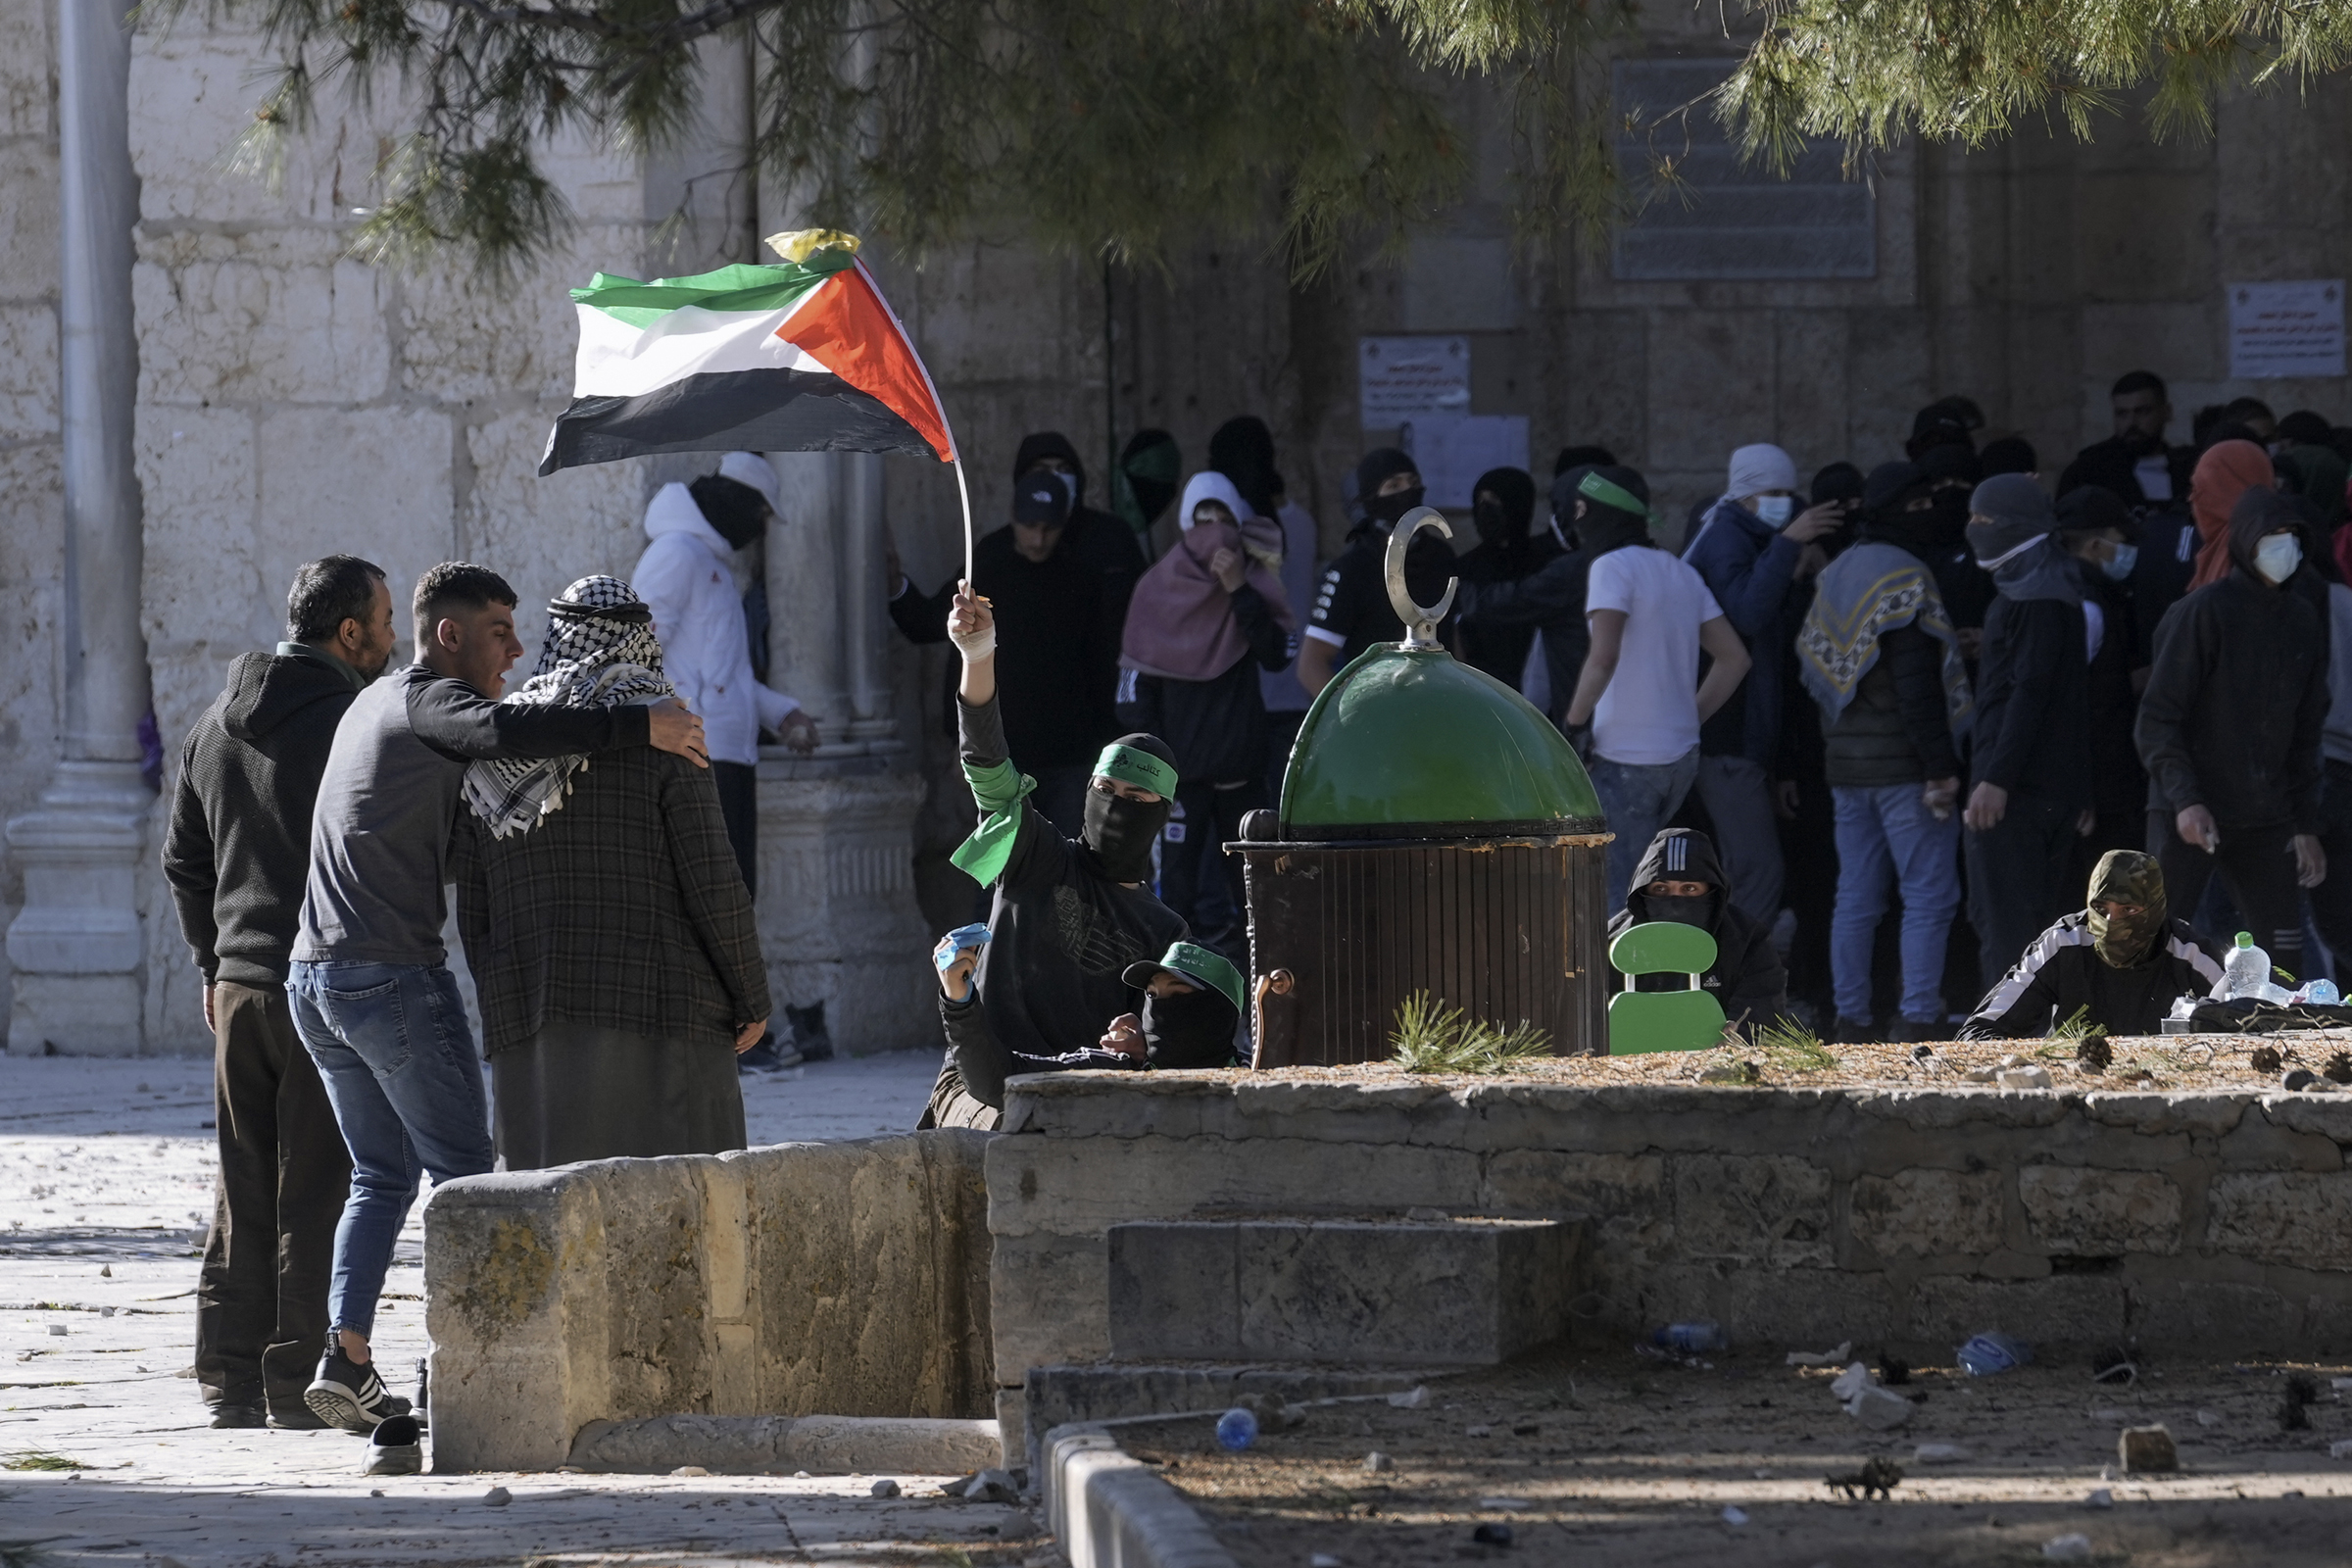 More than 100 hurt in Jerusalem clashes as religious festivals overlap